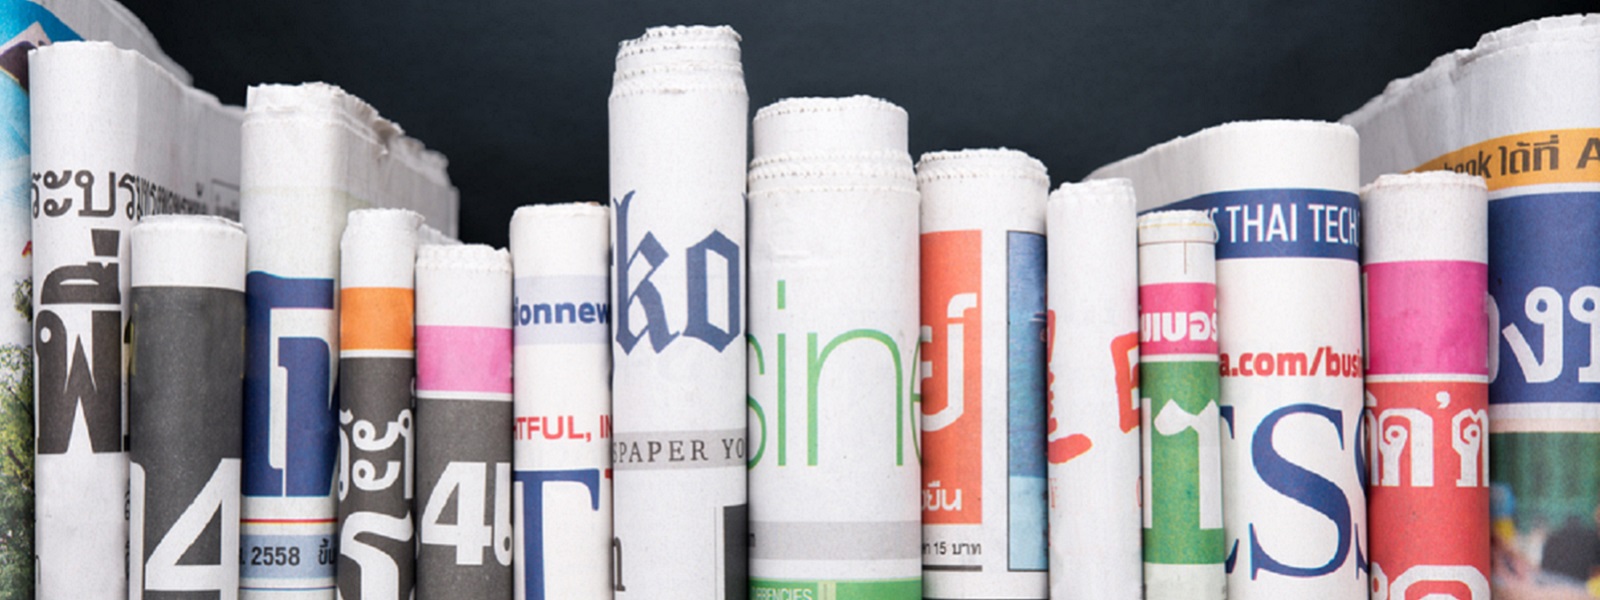 Folded newspapers